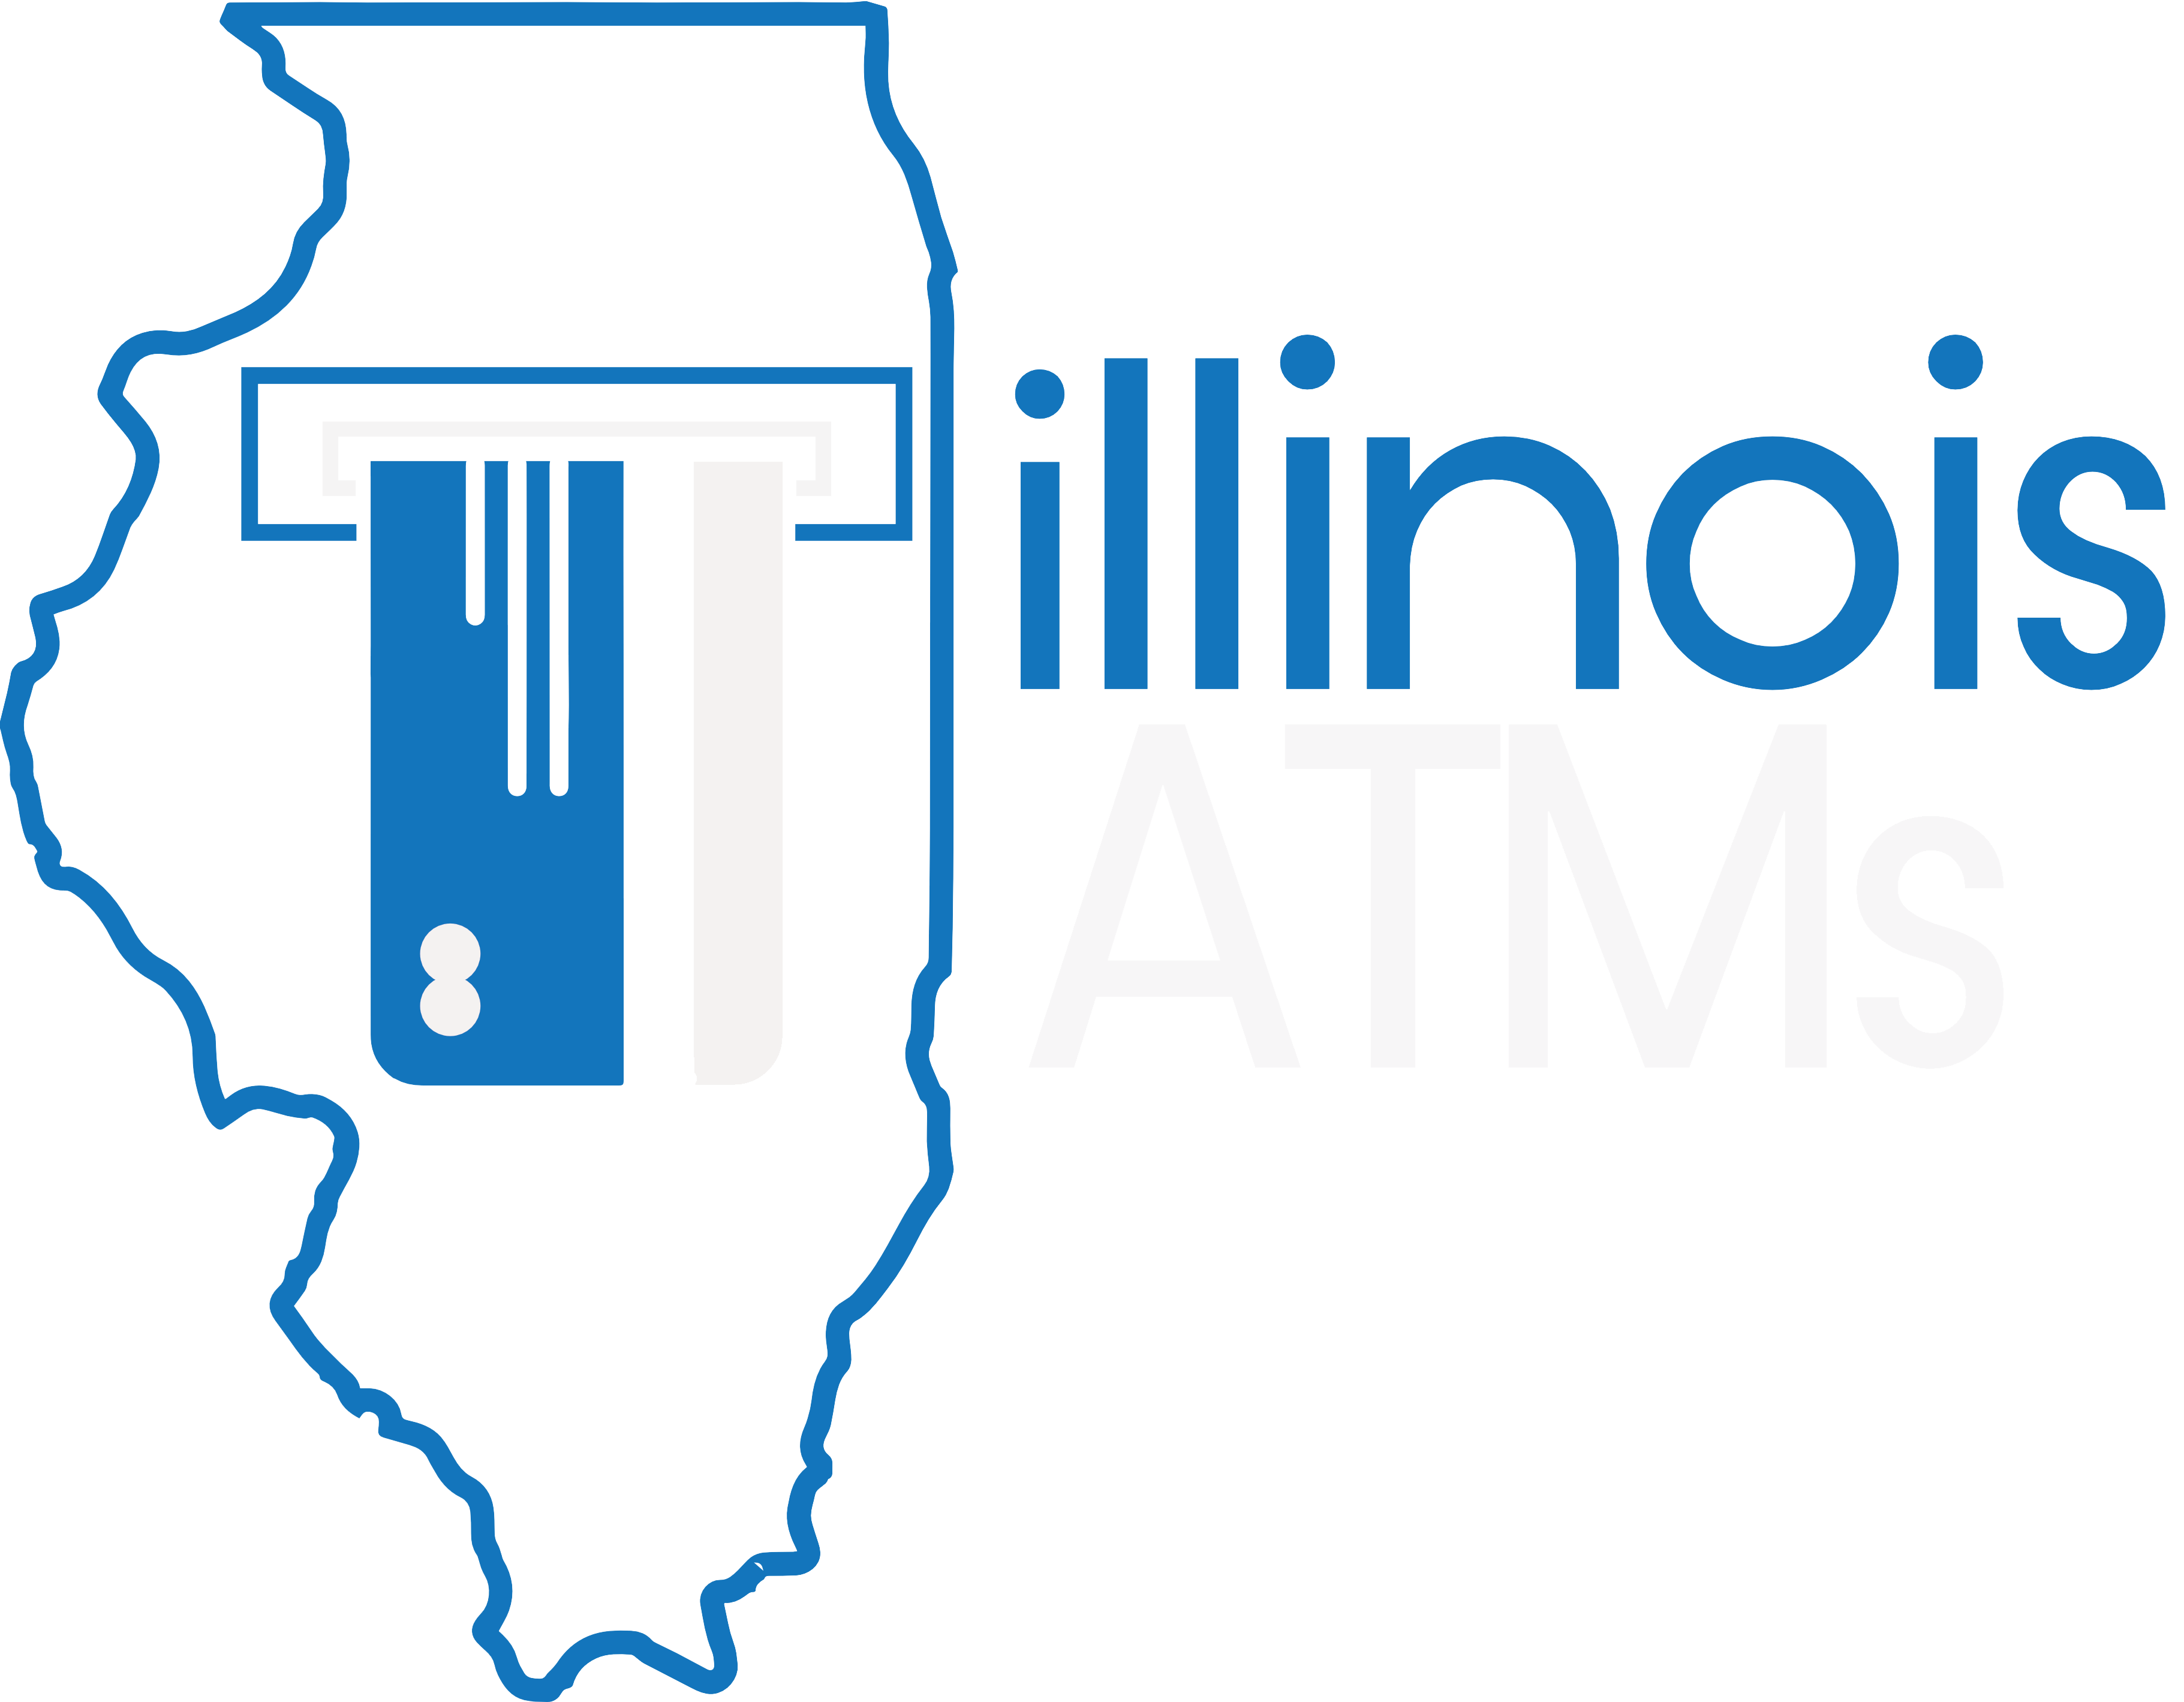 Illinois ATMs - The #1 ATM Supplier